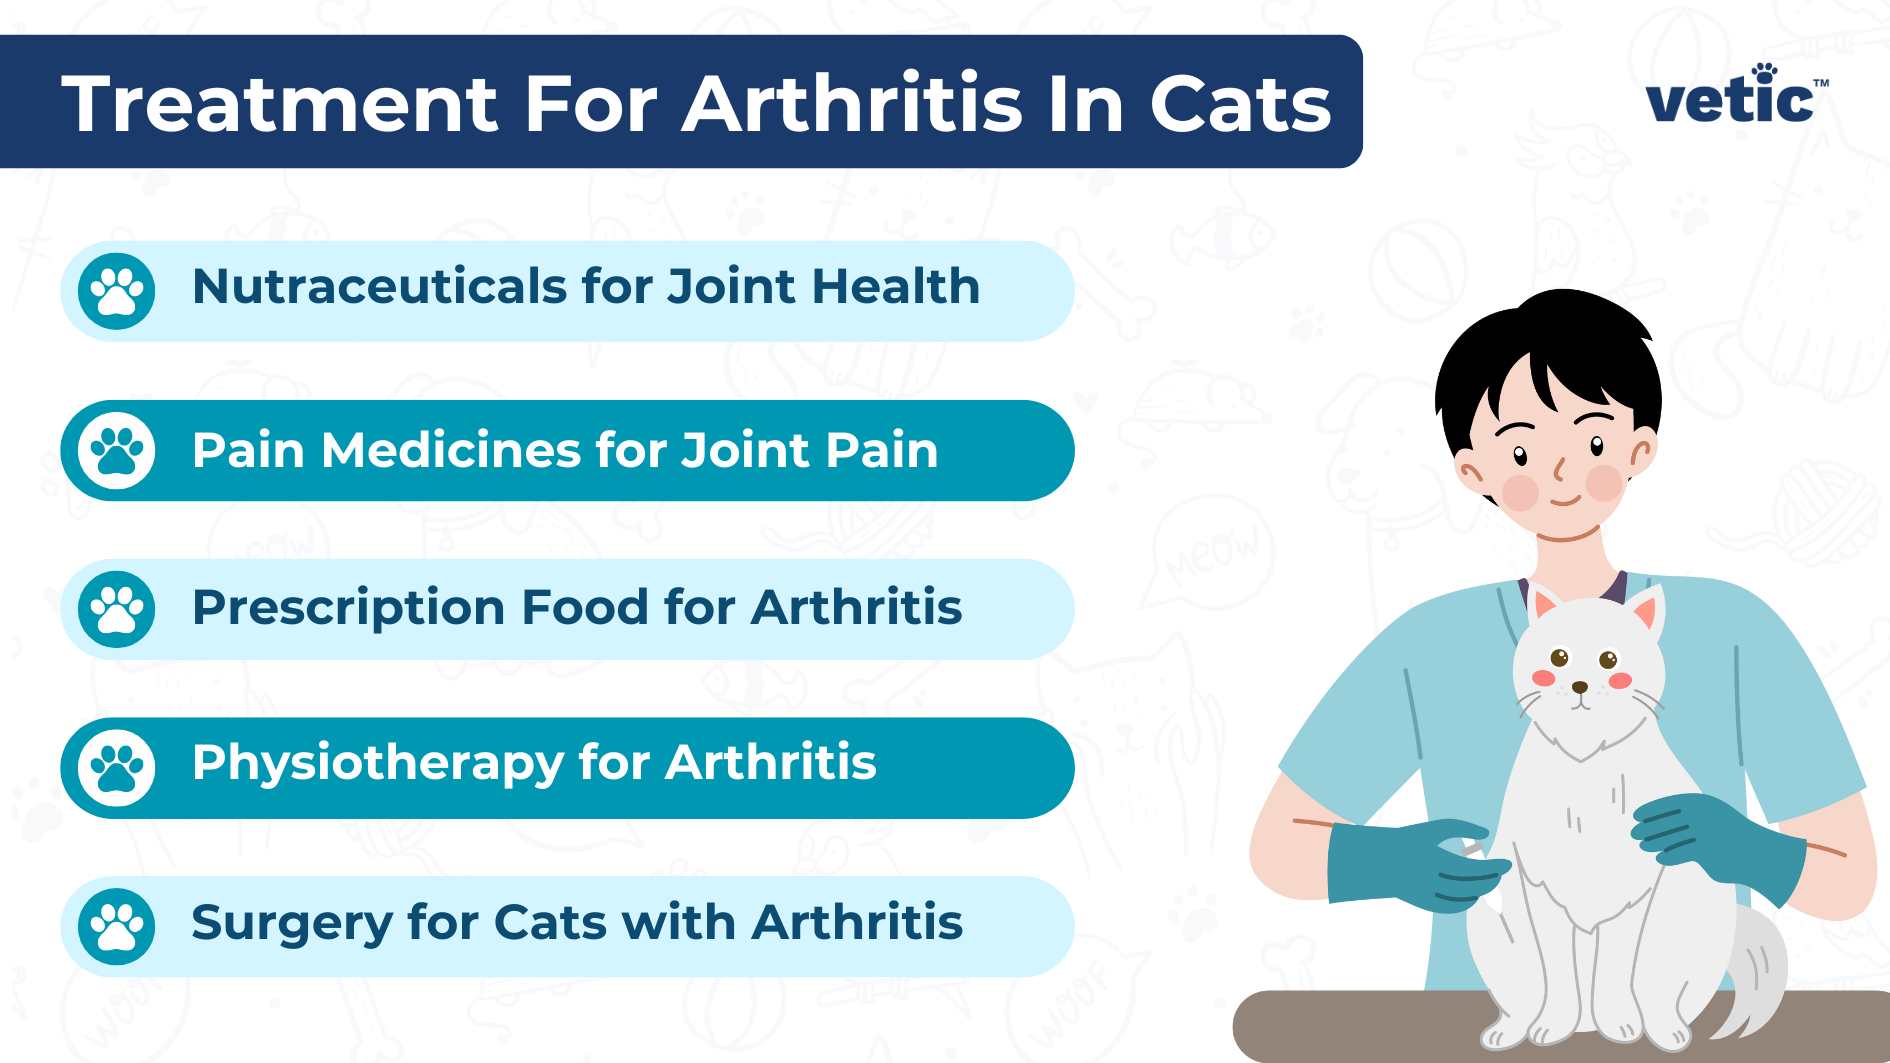 The infographic is titled “Treatment For Arthritis In Cats” and features the logo “vetic” in the top right corner. It includes an illustration of a person wearing gloves and a blue shirt, holding a white cat, set against a white background with faint outlines of cats in various postures. The infographic lists five treatment options for feline arthritis, each presented on a blue banner with accompanying icons: Nutraceuticals for Joint Health Pain Medicines for Joint Pain Prescription Food for Arthritis Physiotherapy for Arthritis Surgery for Cats with Arthritis